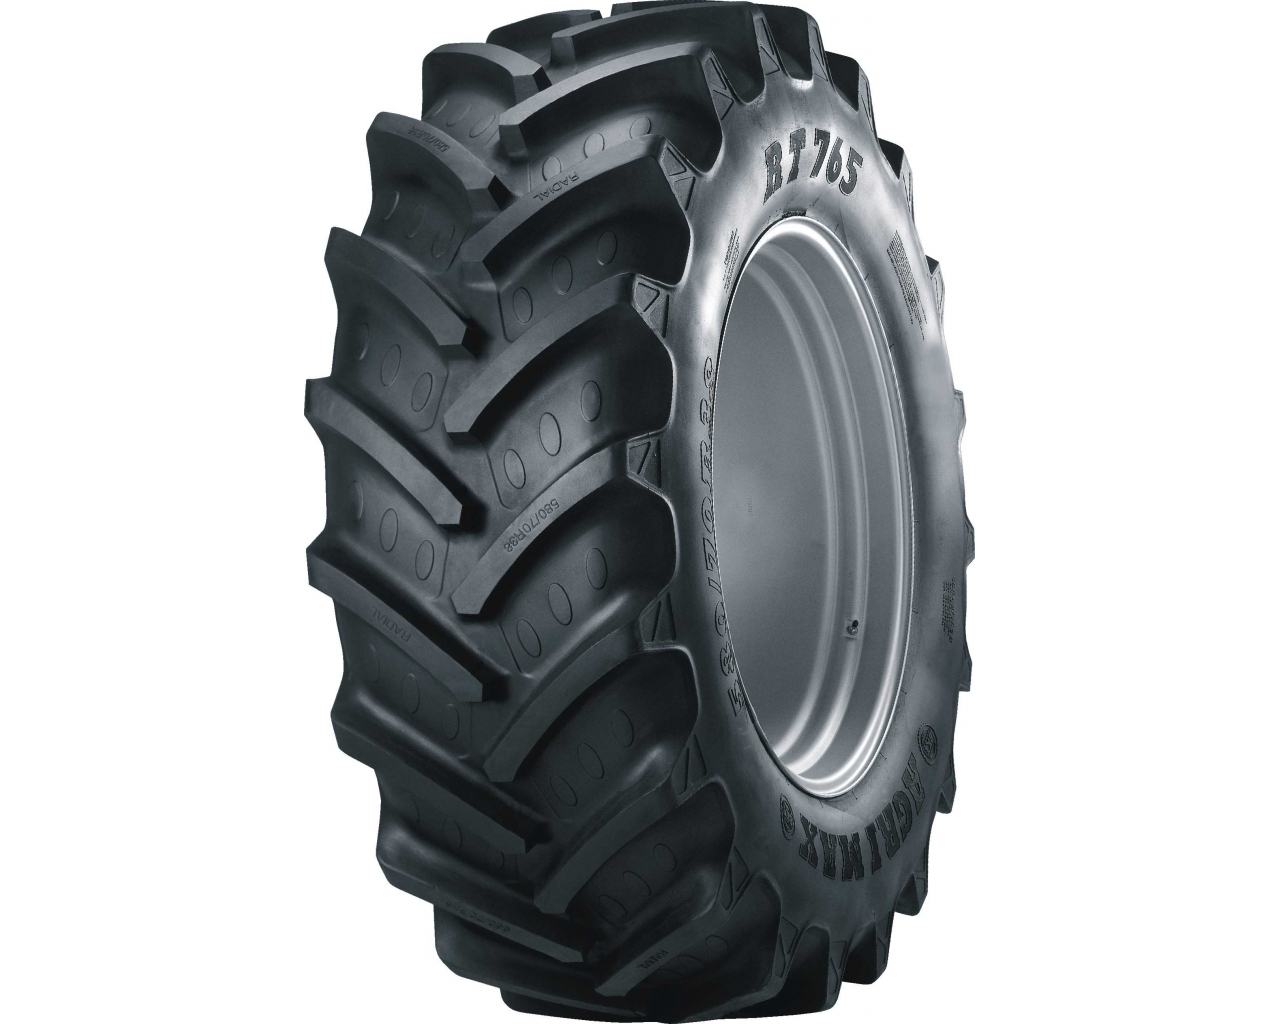 Шина 580/70R38 BKT AGRIMAX RT-765 155A8 TL